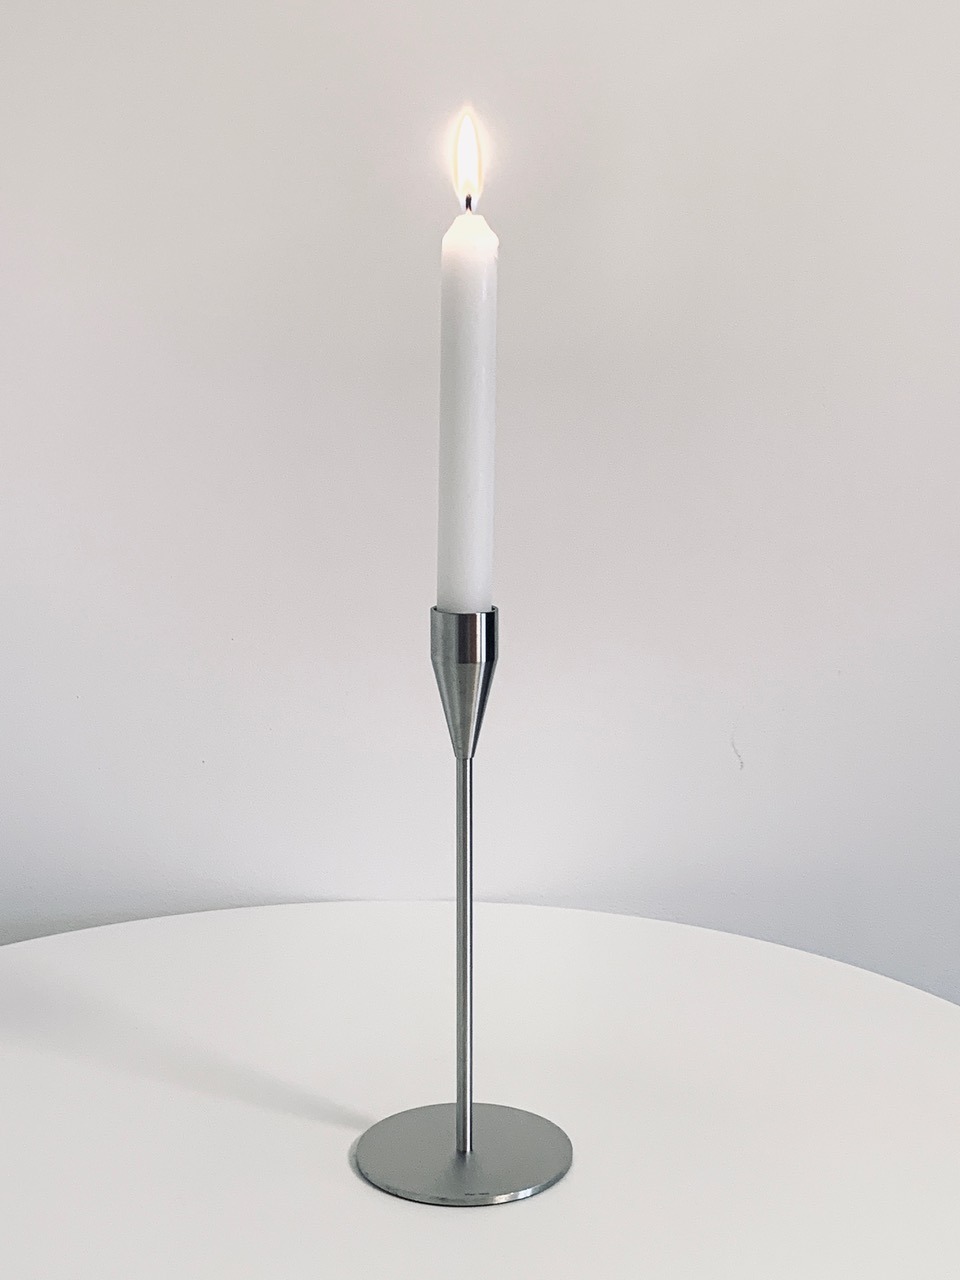 Image of the Piet Hein candle holder venus offered in this advertisement